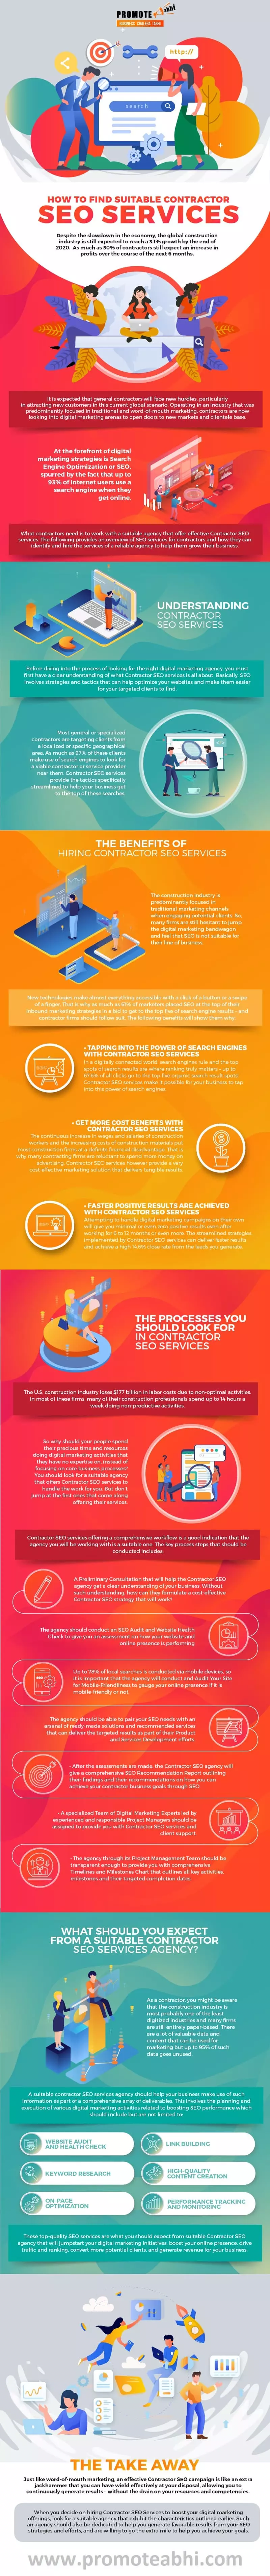 SEO Services Process to Get #1 Ranking